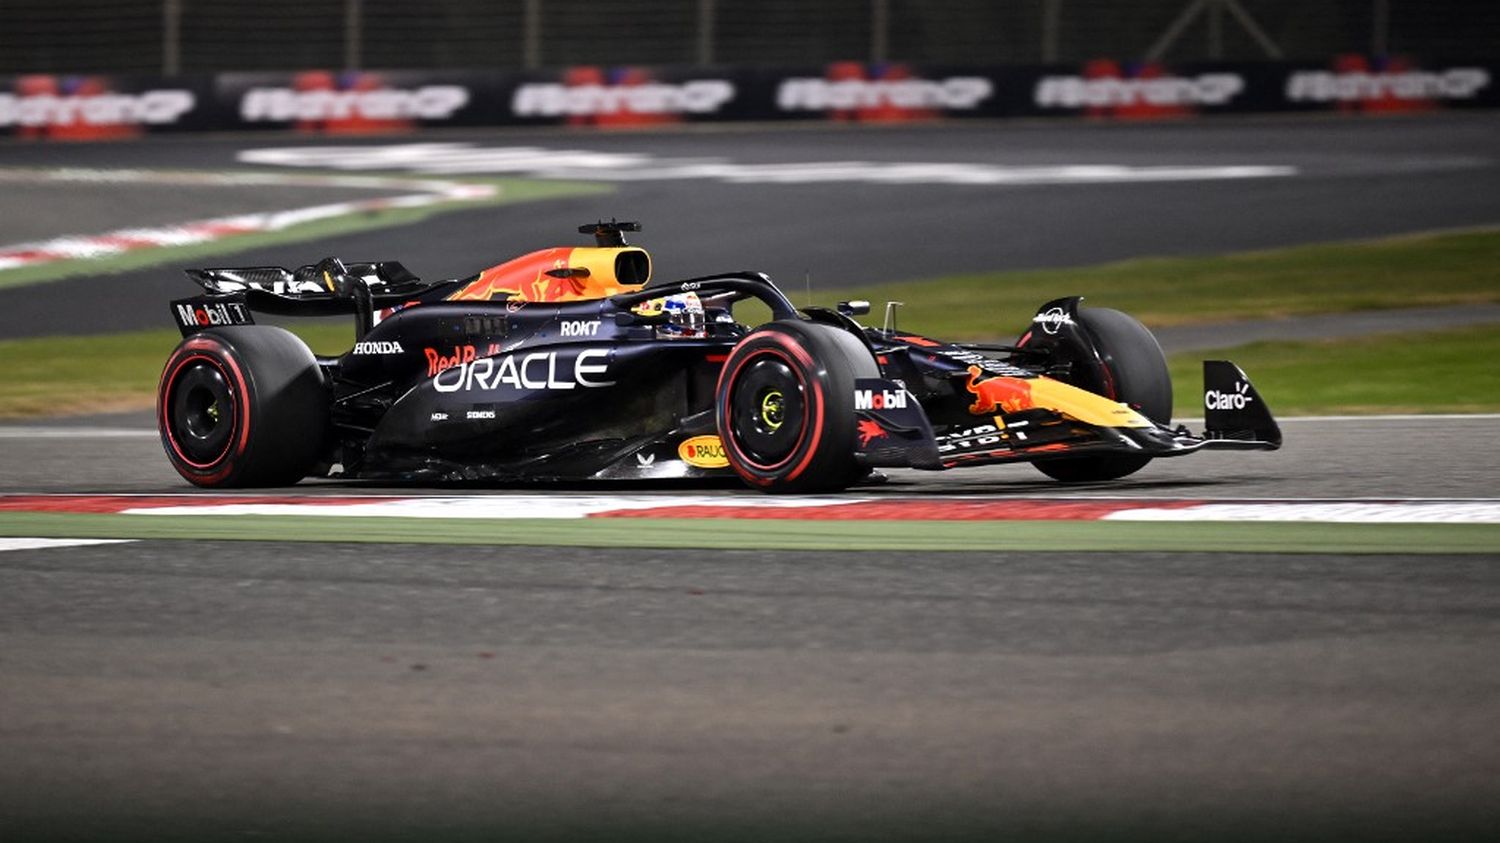 F1: no worries, Max Verstappen wins the first Grand Prix of the season in Bahrain